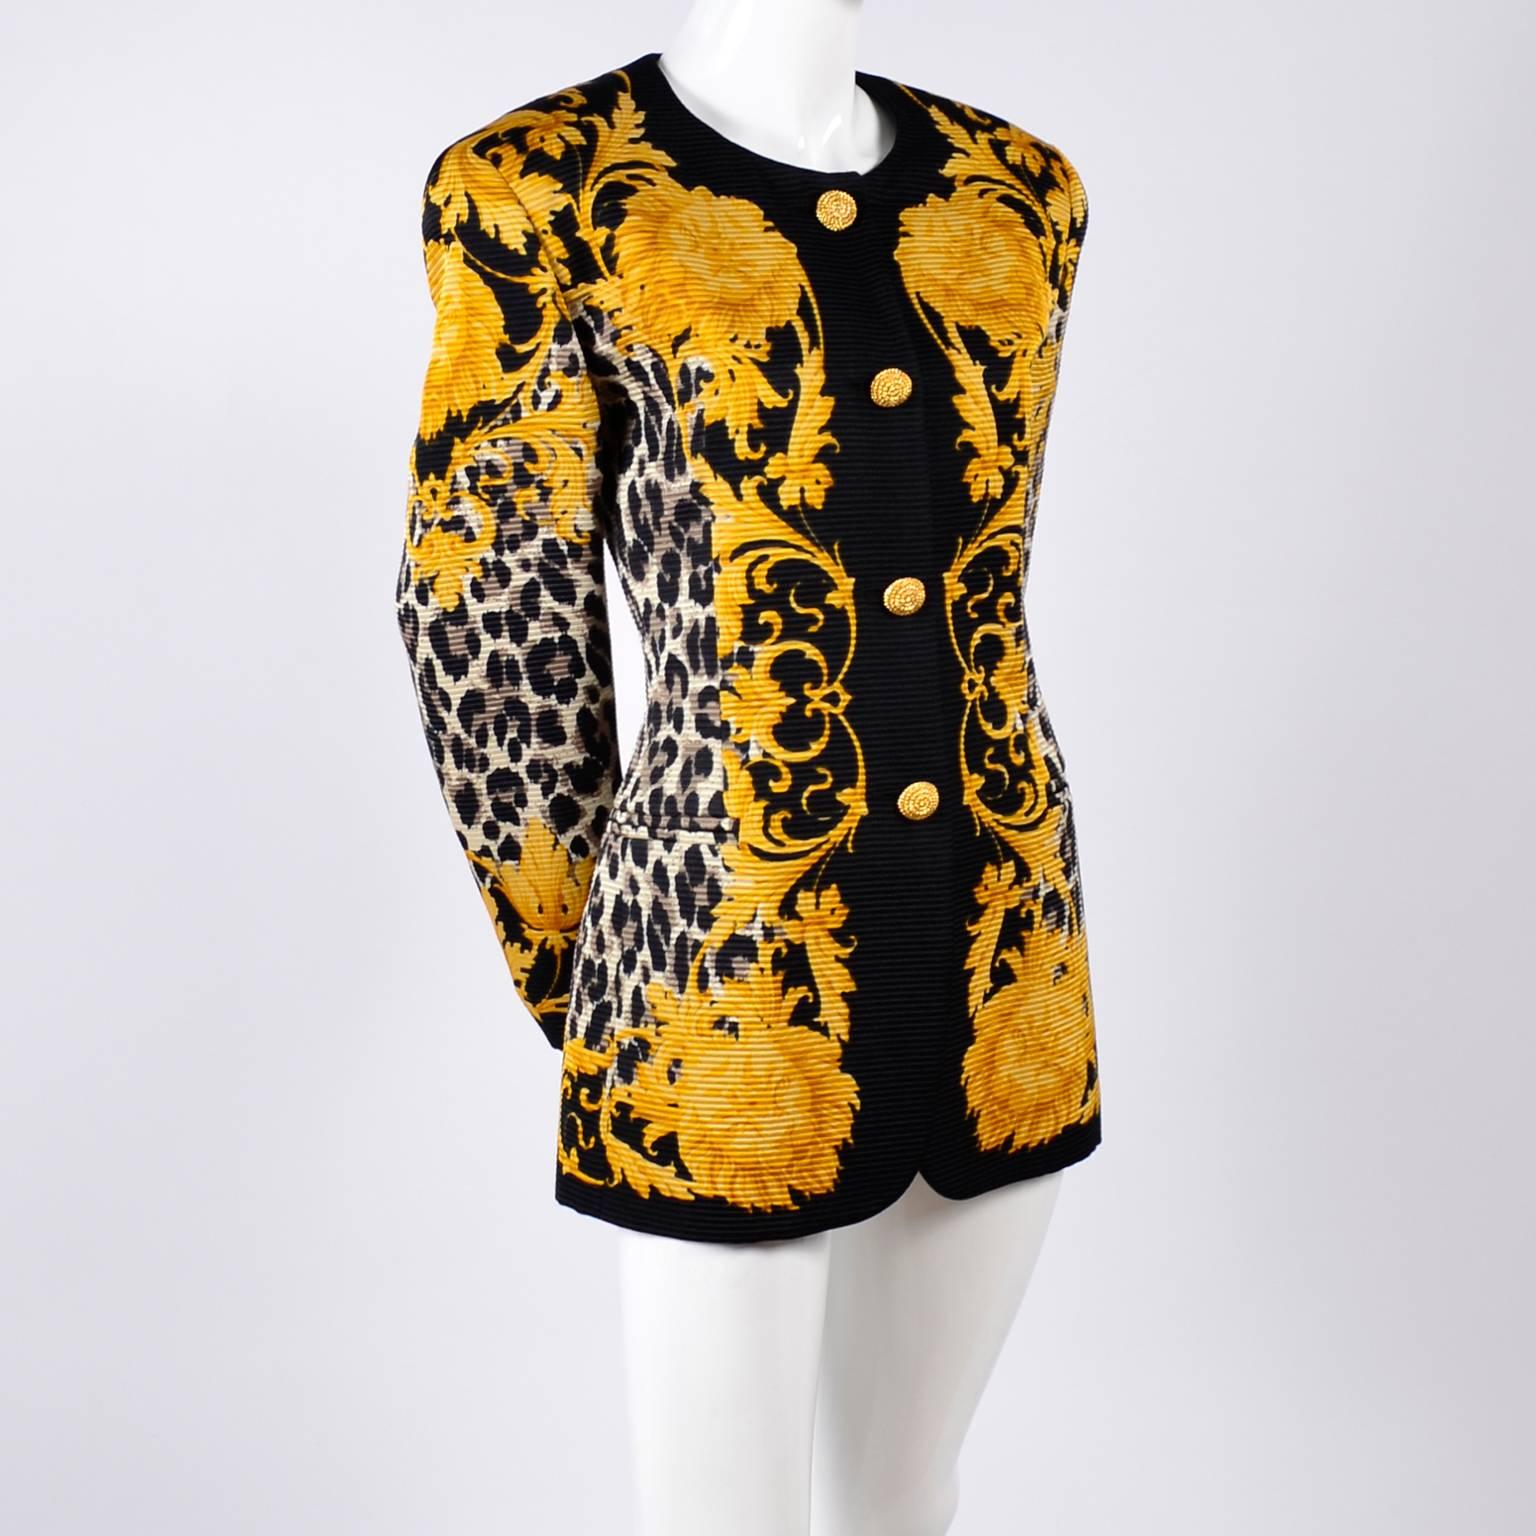 This is a beautiful ribbed silk baroque print blazer designed by Margaretha Ley for Escada.  The pattern of the jacket includes a black and brown animal print, yellow lion faces, yellow leaves and solid black trim.This vintage Escada jacket has a